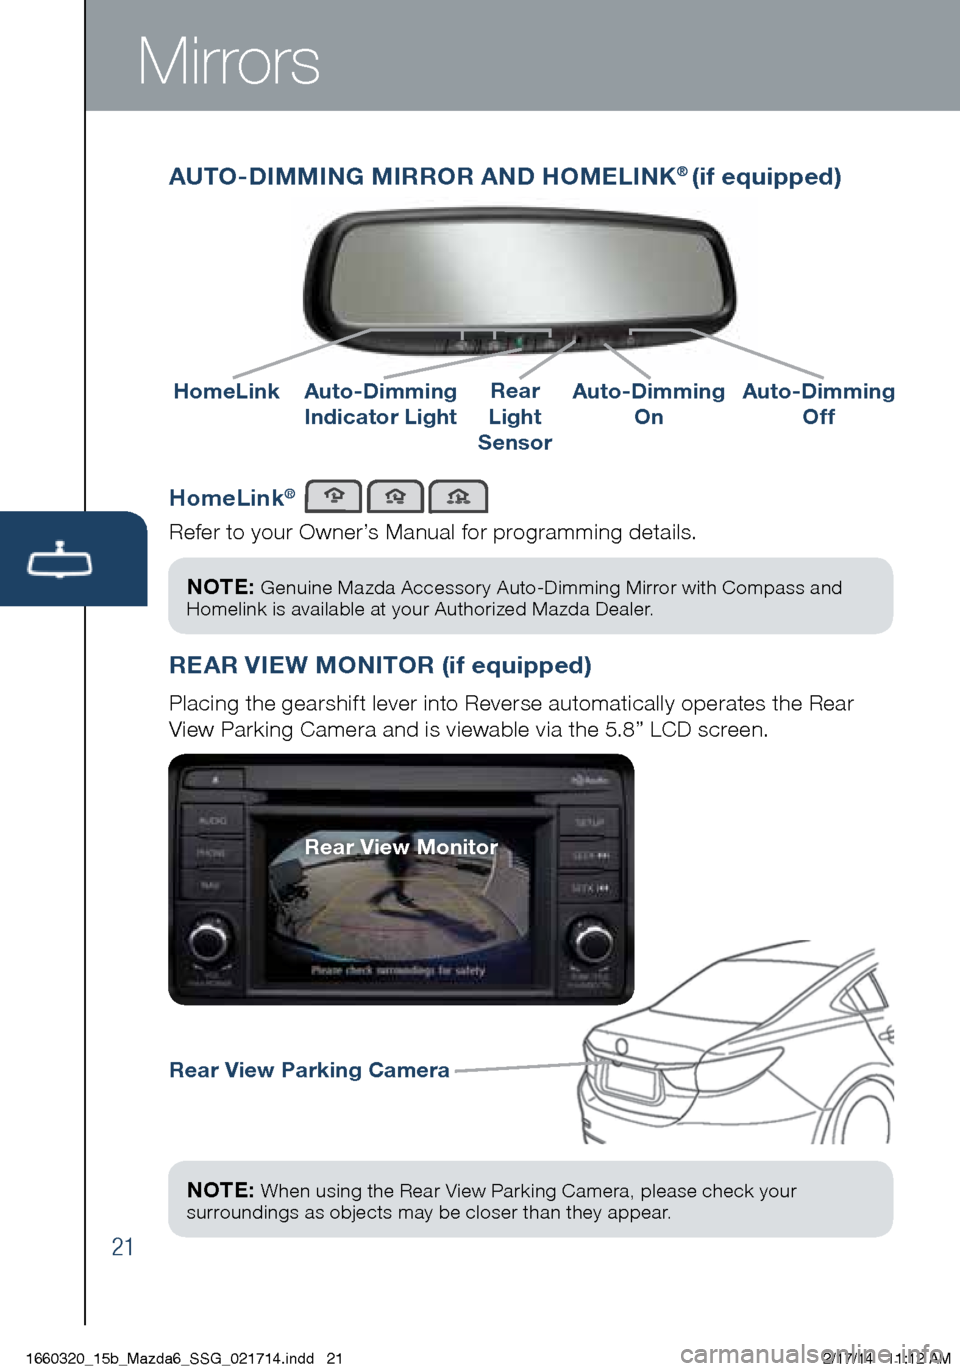 MAZDA MODEL 6 2015  Smart Start Guide (in English) 21
NOTE: Genuine Mazda Accessory Auto-Dimming Mirror with Compass and 
Homelink is available at your Authorized Mazda Dealer.
HomeLink®
Refer to your Owner’s Manual for programming details.
AUTO-DI